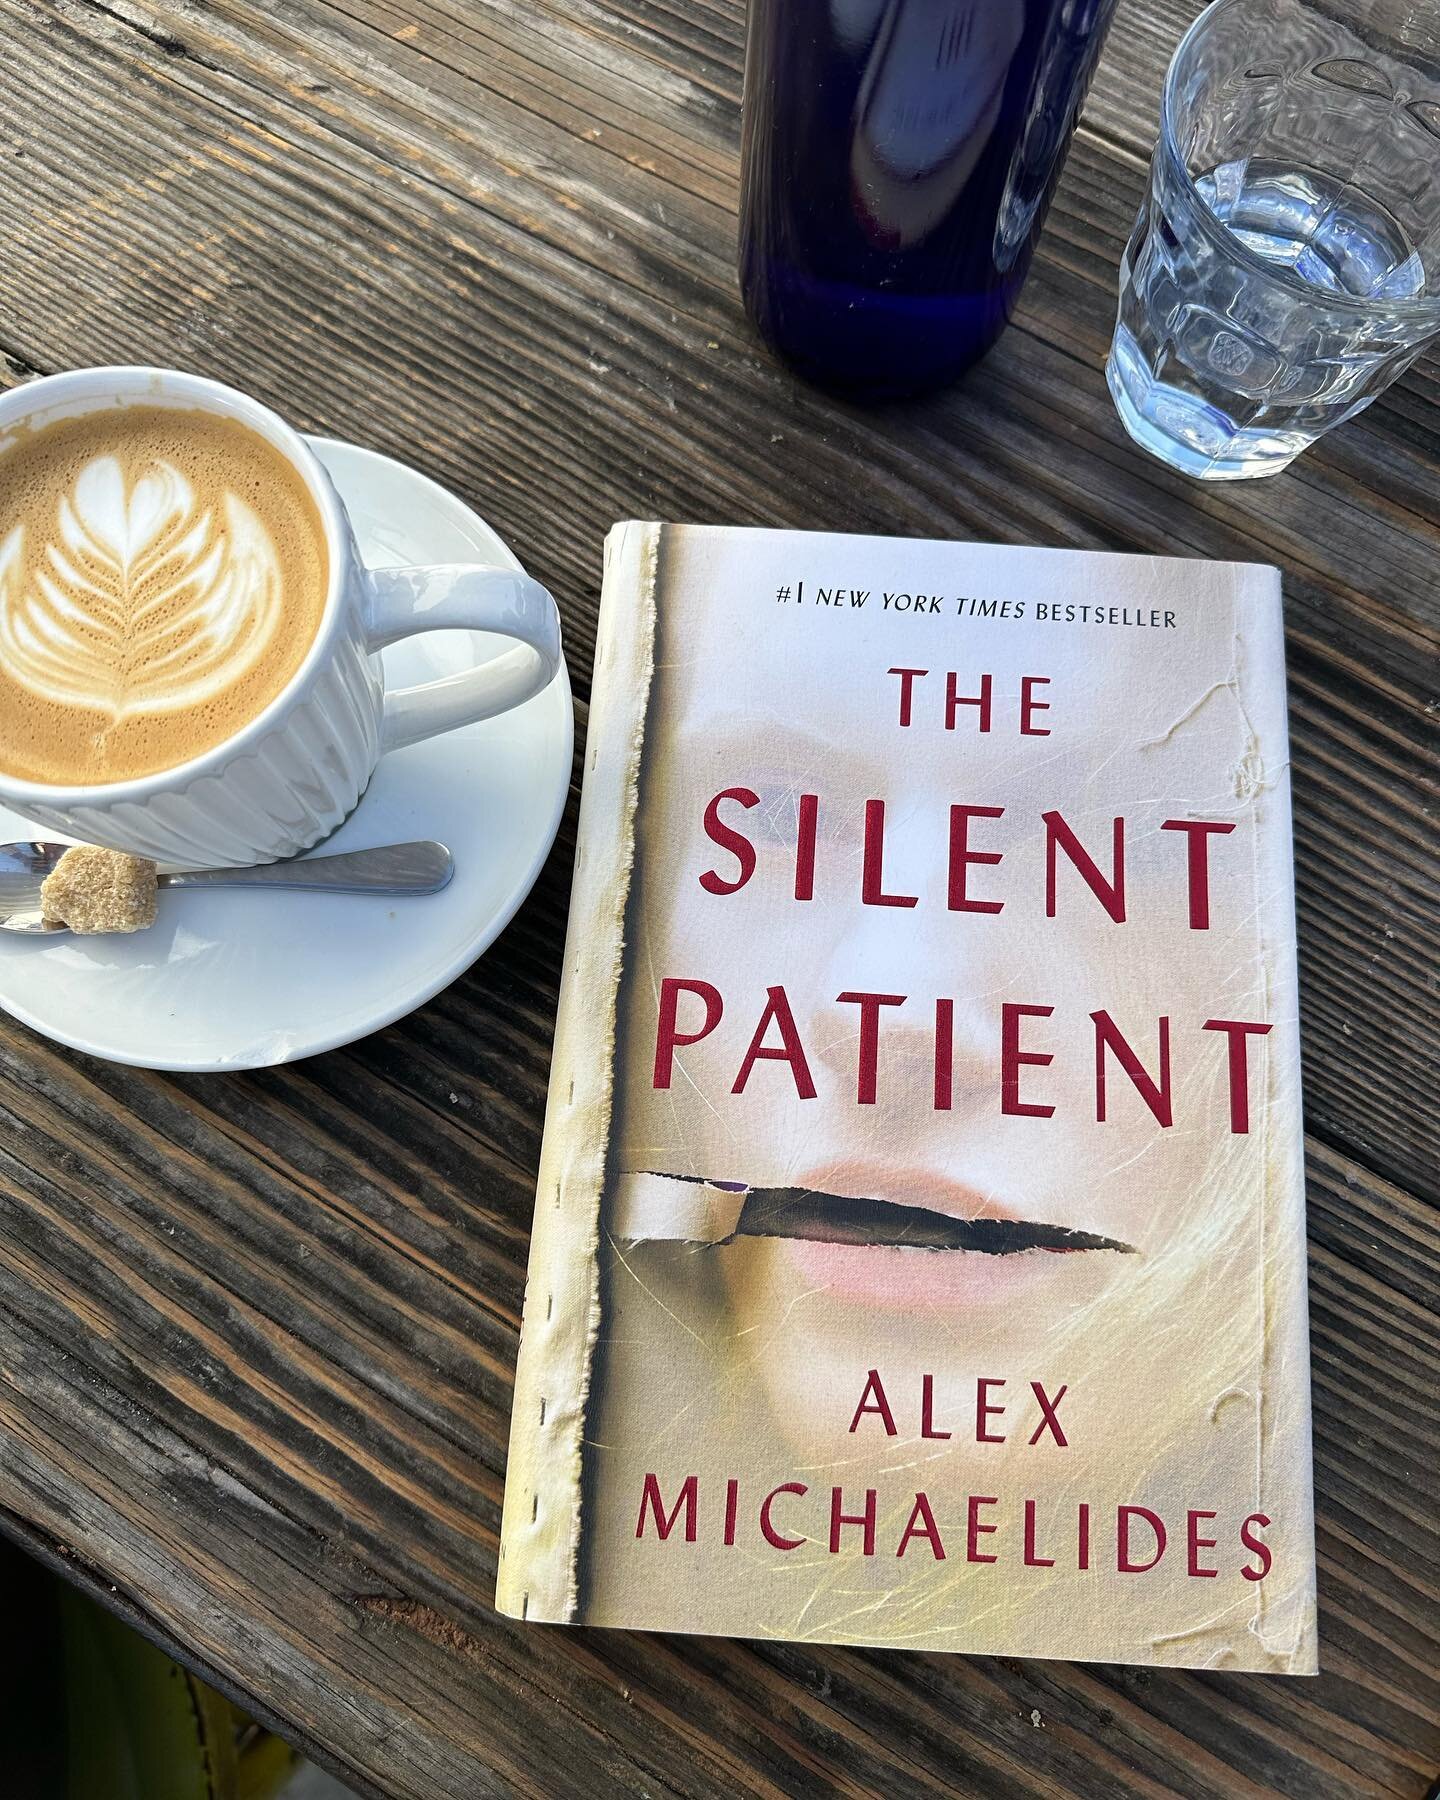 The Silent Patient by Alex Michaelides &mdash; This is a chilling, psychological thriller full of twists and turns that will have you on the edge of your seat for the entire ride. I suggest this book for either of two occasions: 1) you are just getti